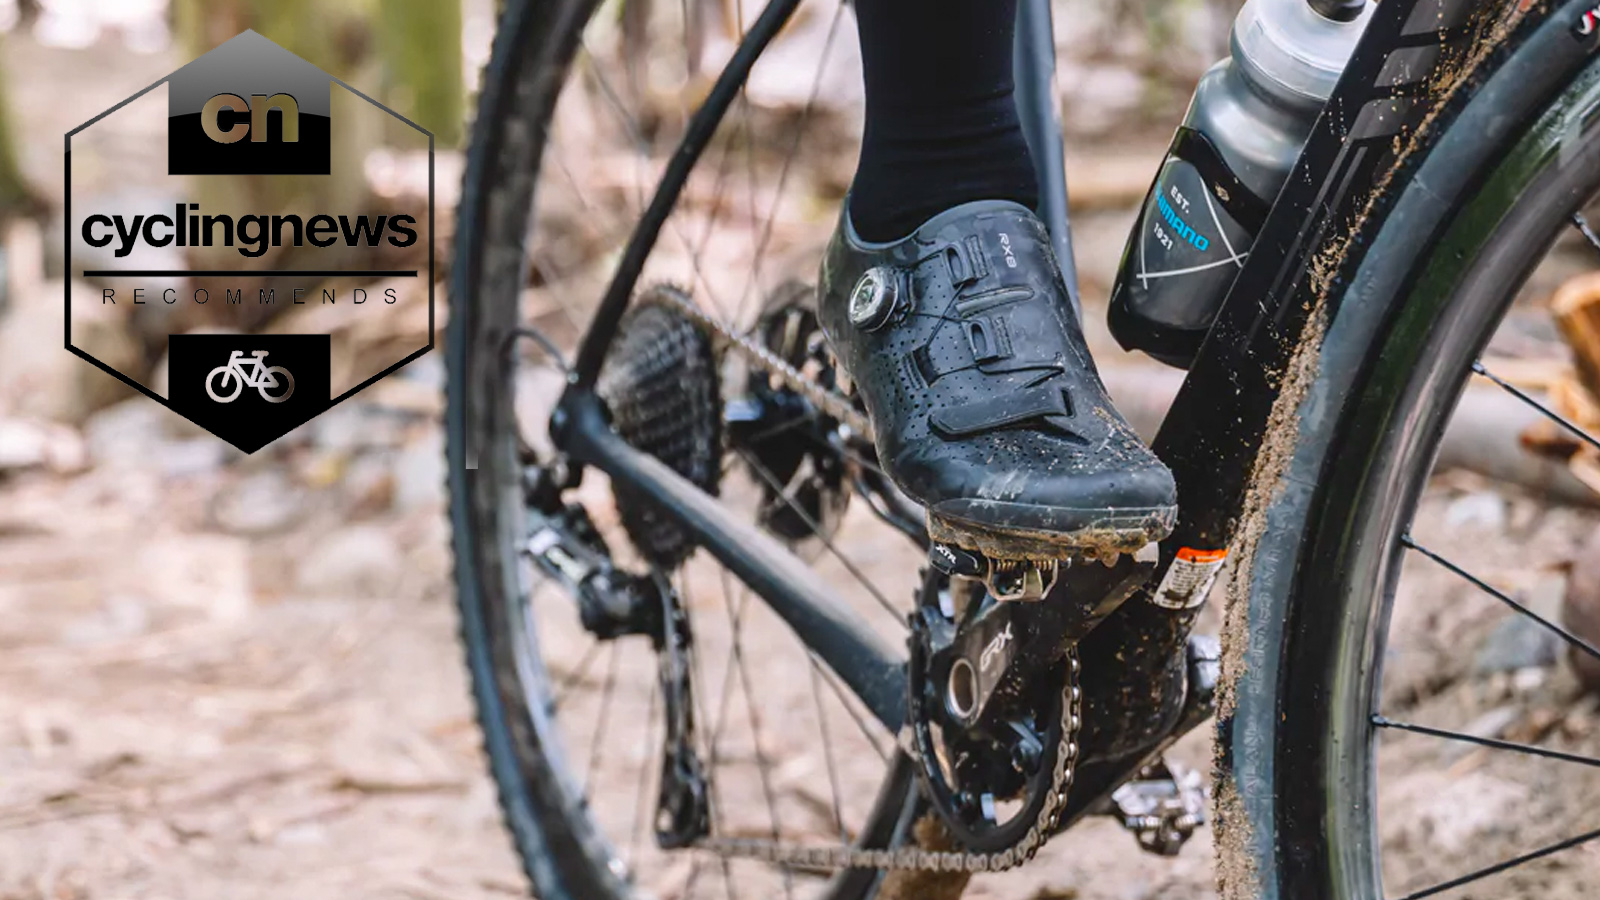 The Best Gravel Bike Shoes Cycling Shoes For Gravel Riding